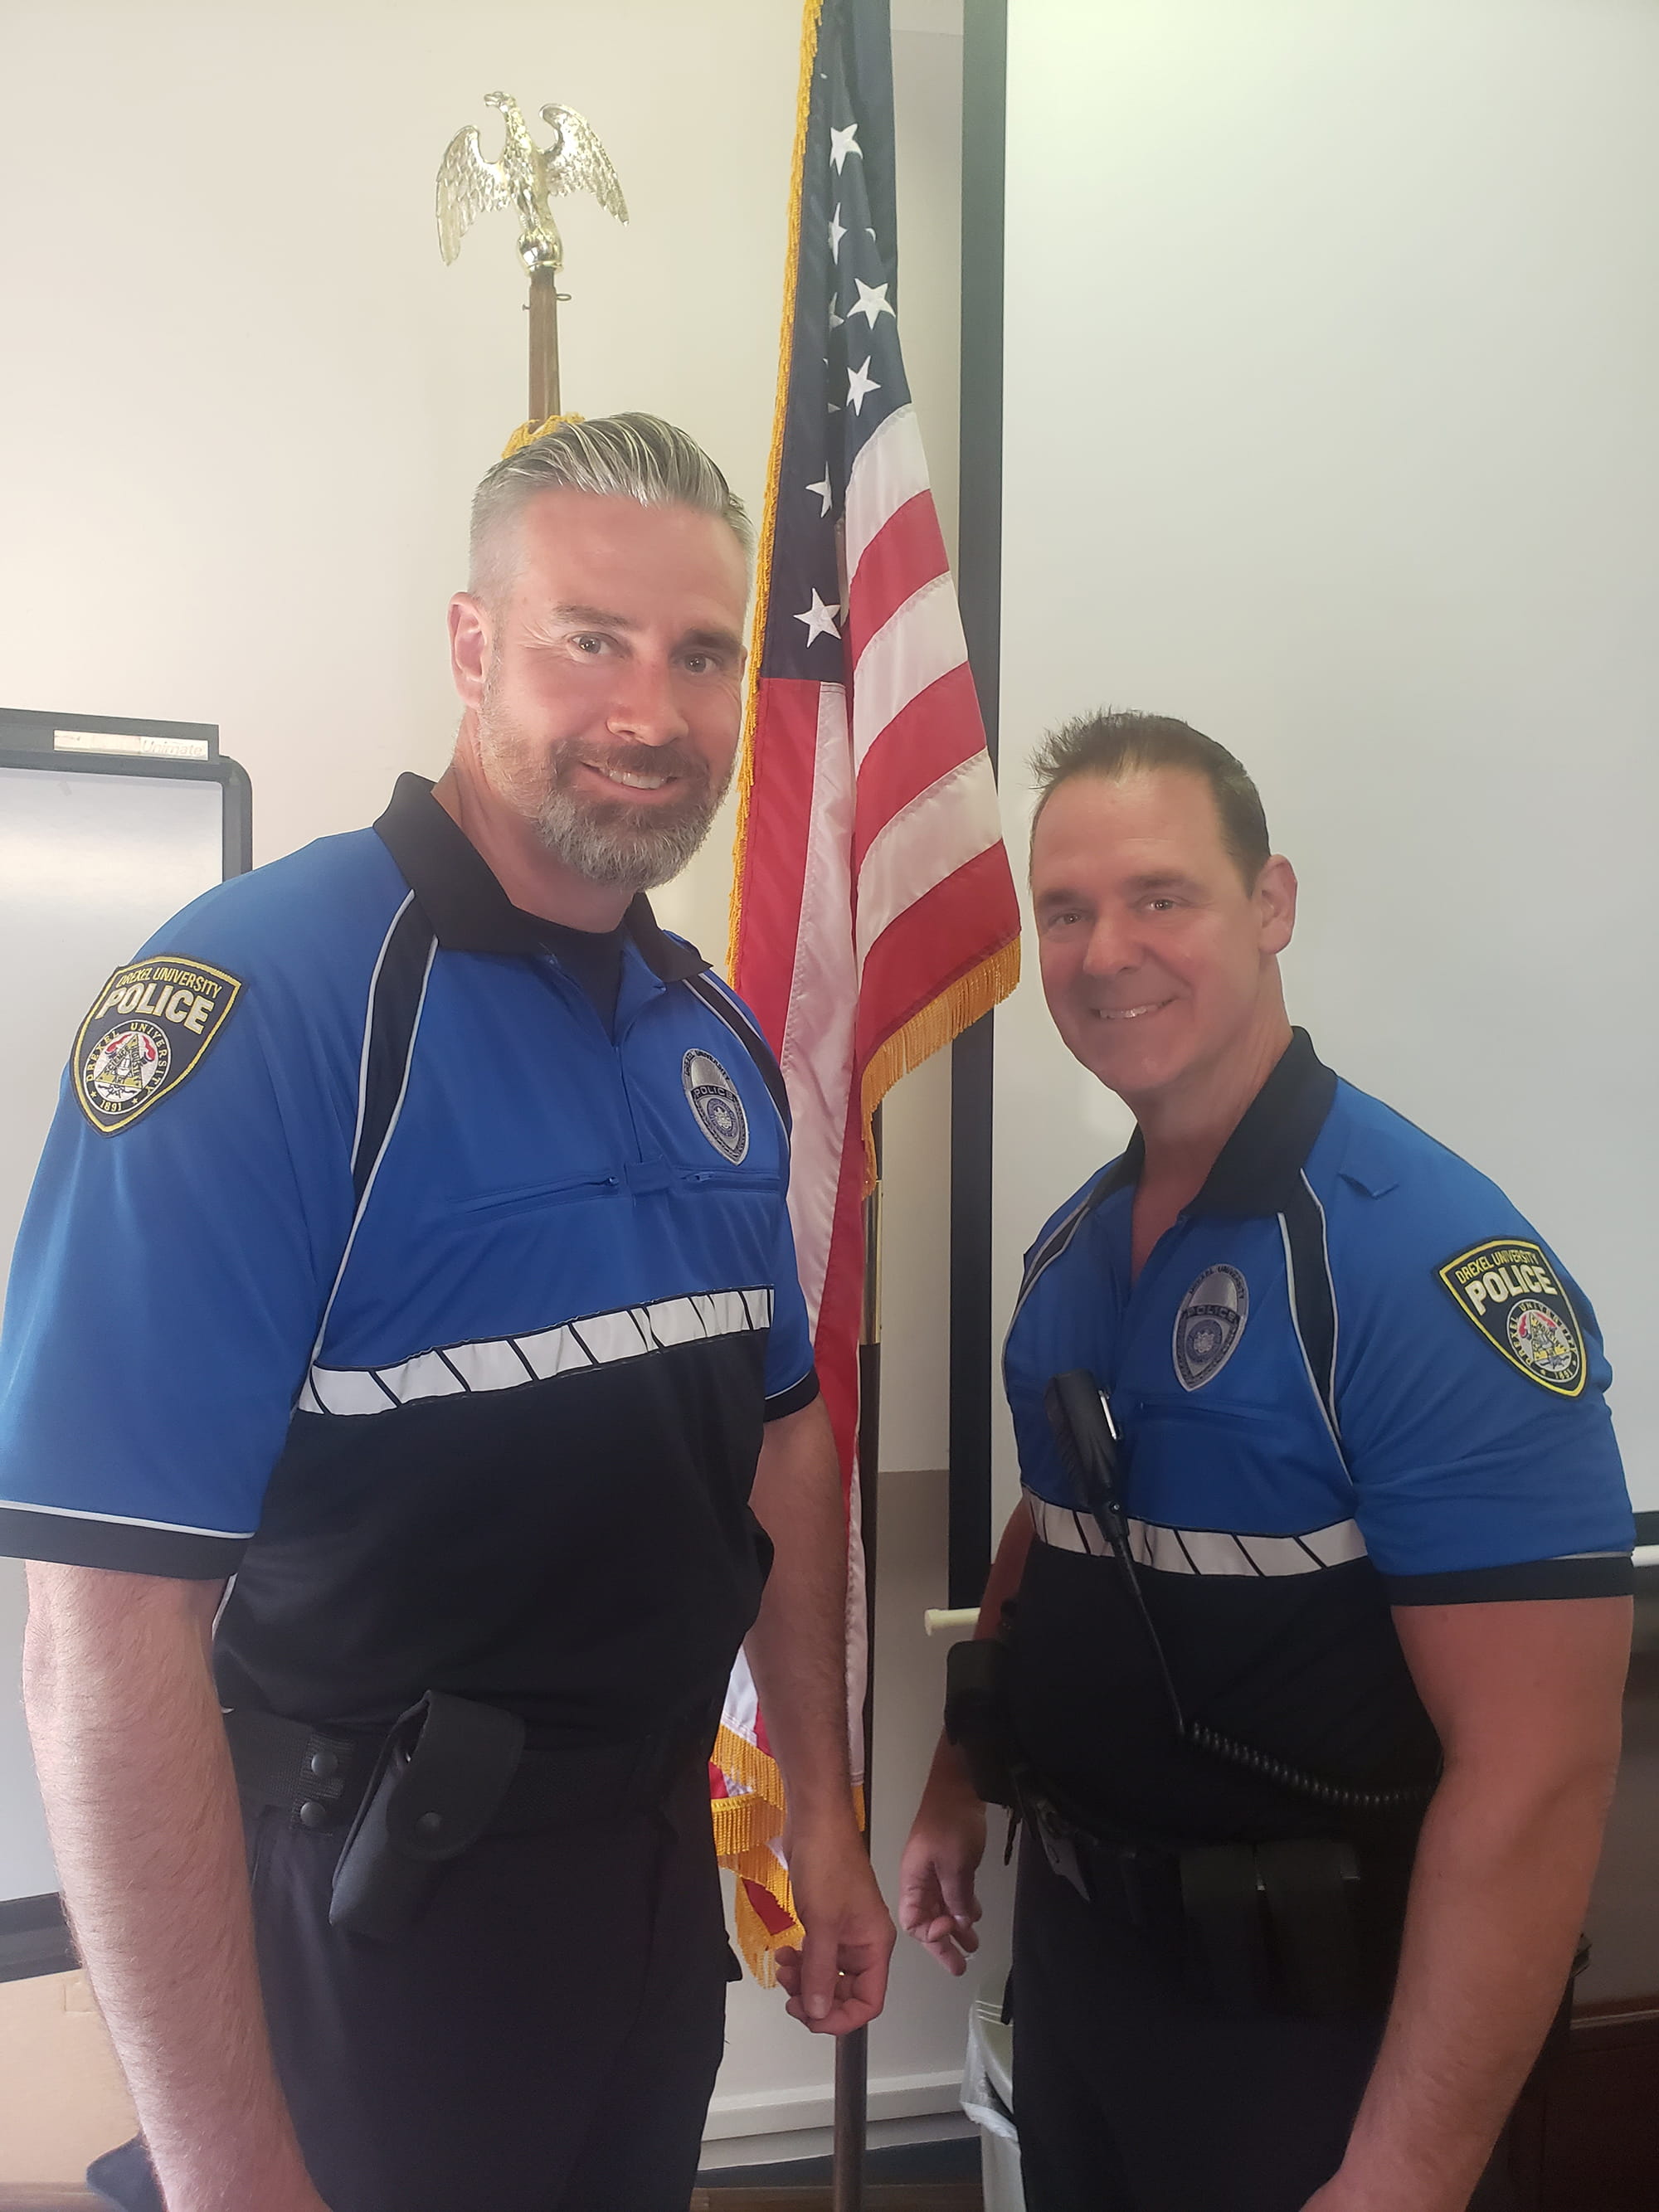 Officer Quigley (left) and Officer Orth (right) engage with and protect the community each day on bike patrol.]